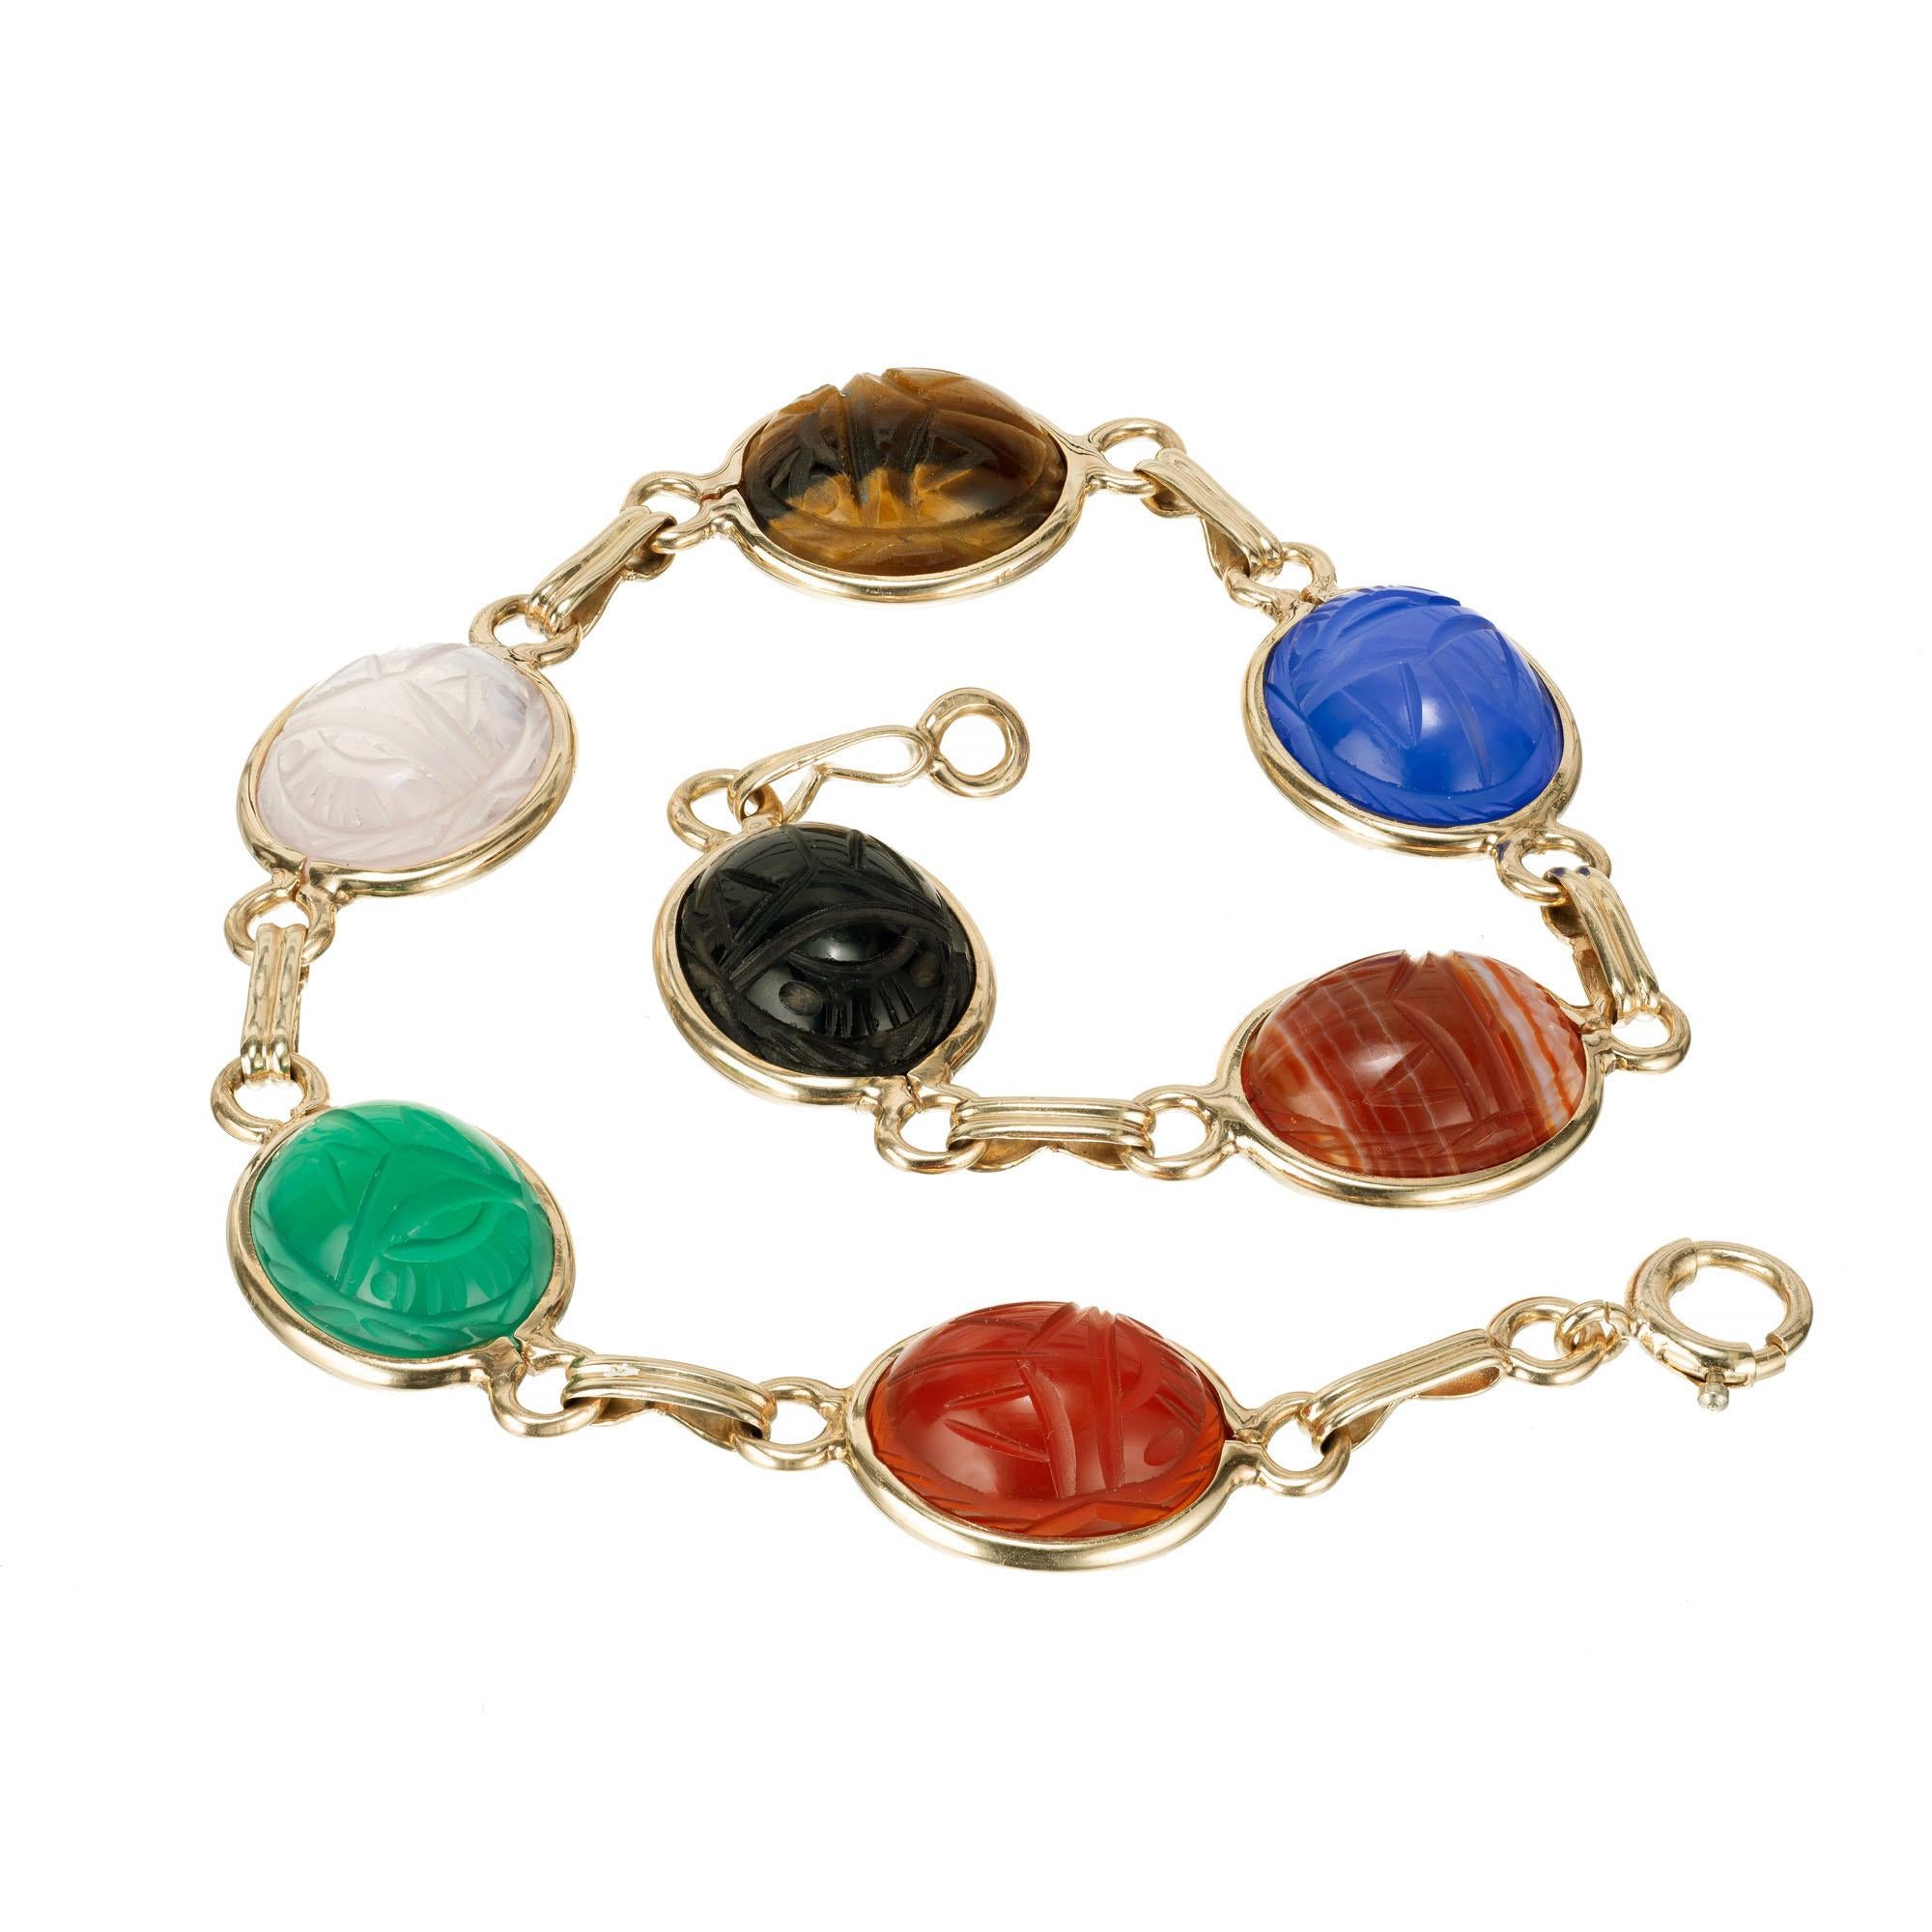  Seven stone bezel set, 1960’s classic multi-color Quartz, carnelian, chrysophase, turquoise, blue chalcedony, agate and onyx  scarab link bracelet carved front and back. 

1 oval Carnelian 10.84 x 8.99 x 5.40mm 
1 oval Chrysophase 
1 oval rose